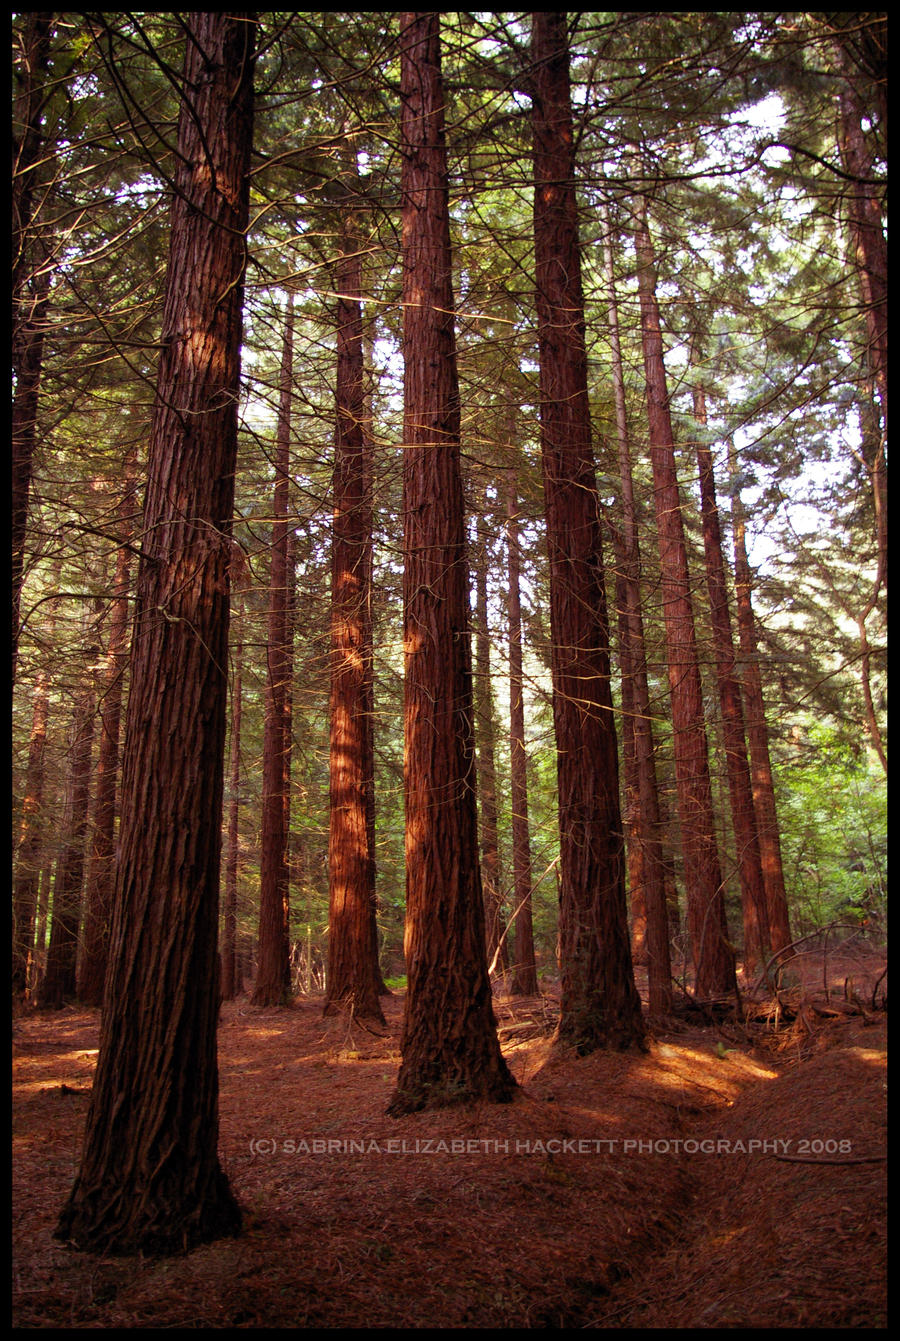 Download this Redwood Forest Hitomii picture